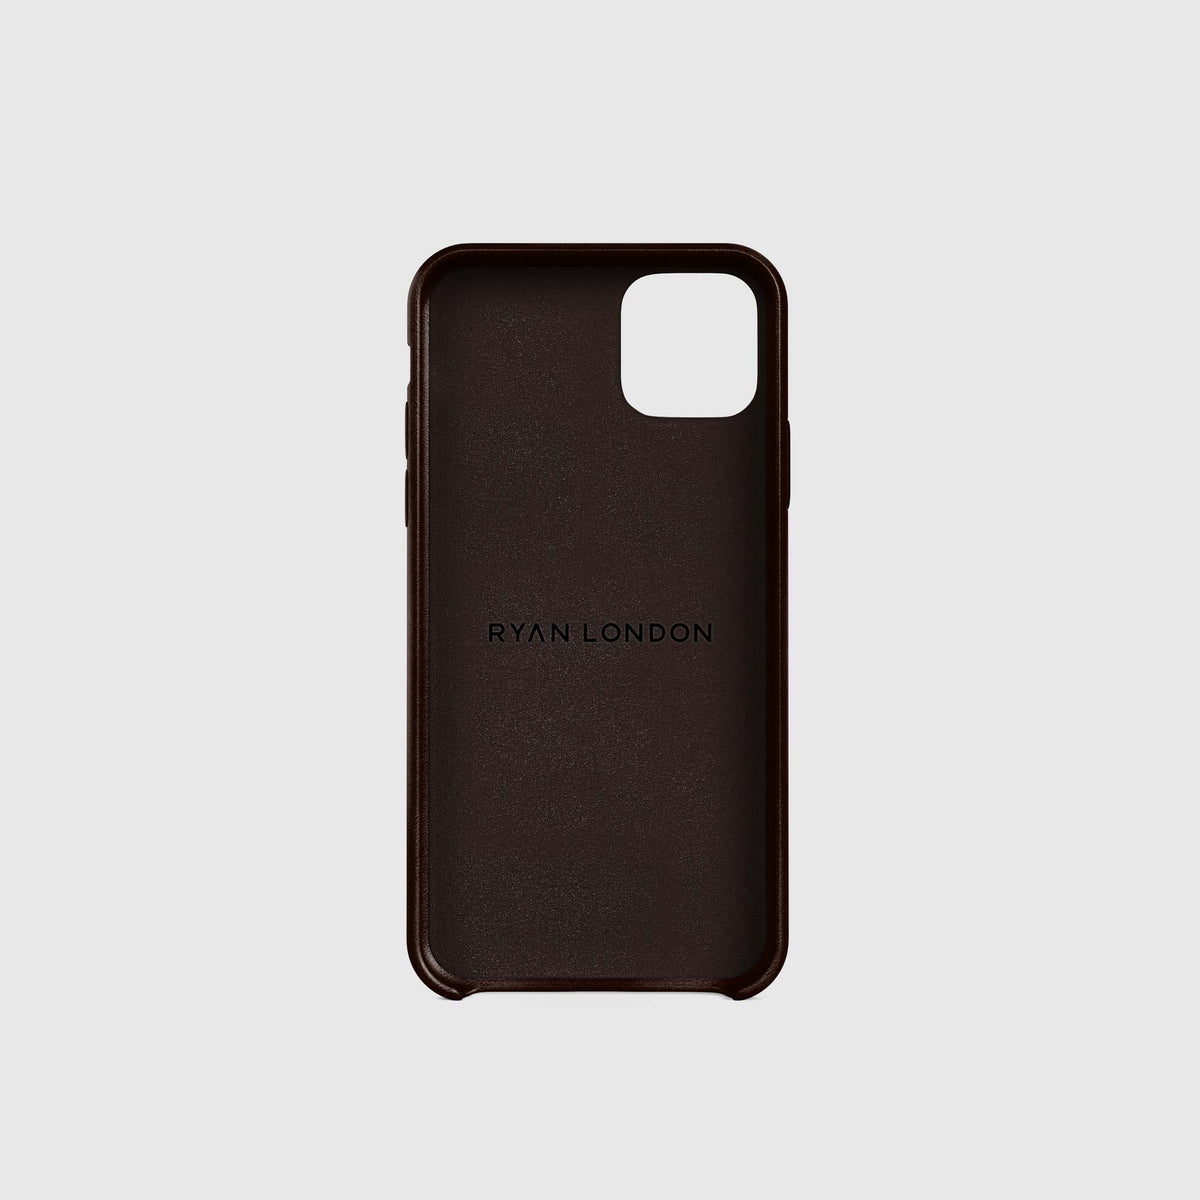 Leather iPhone 12 Pro Max Shell Case - Dark Brown - RYAN London